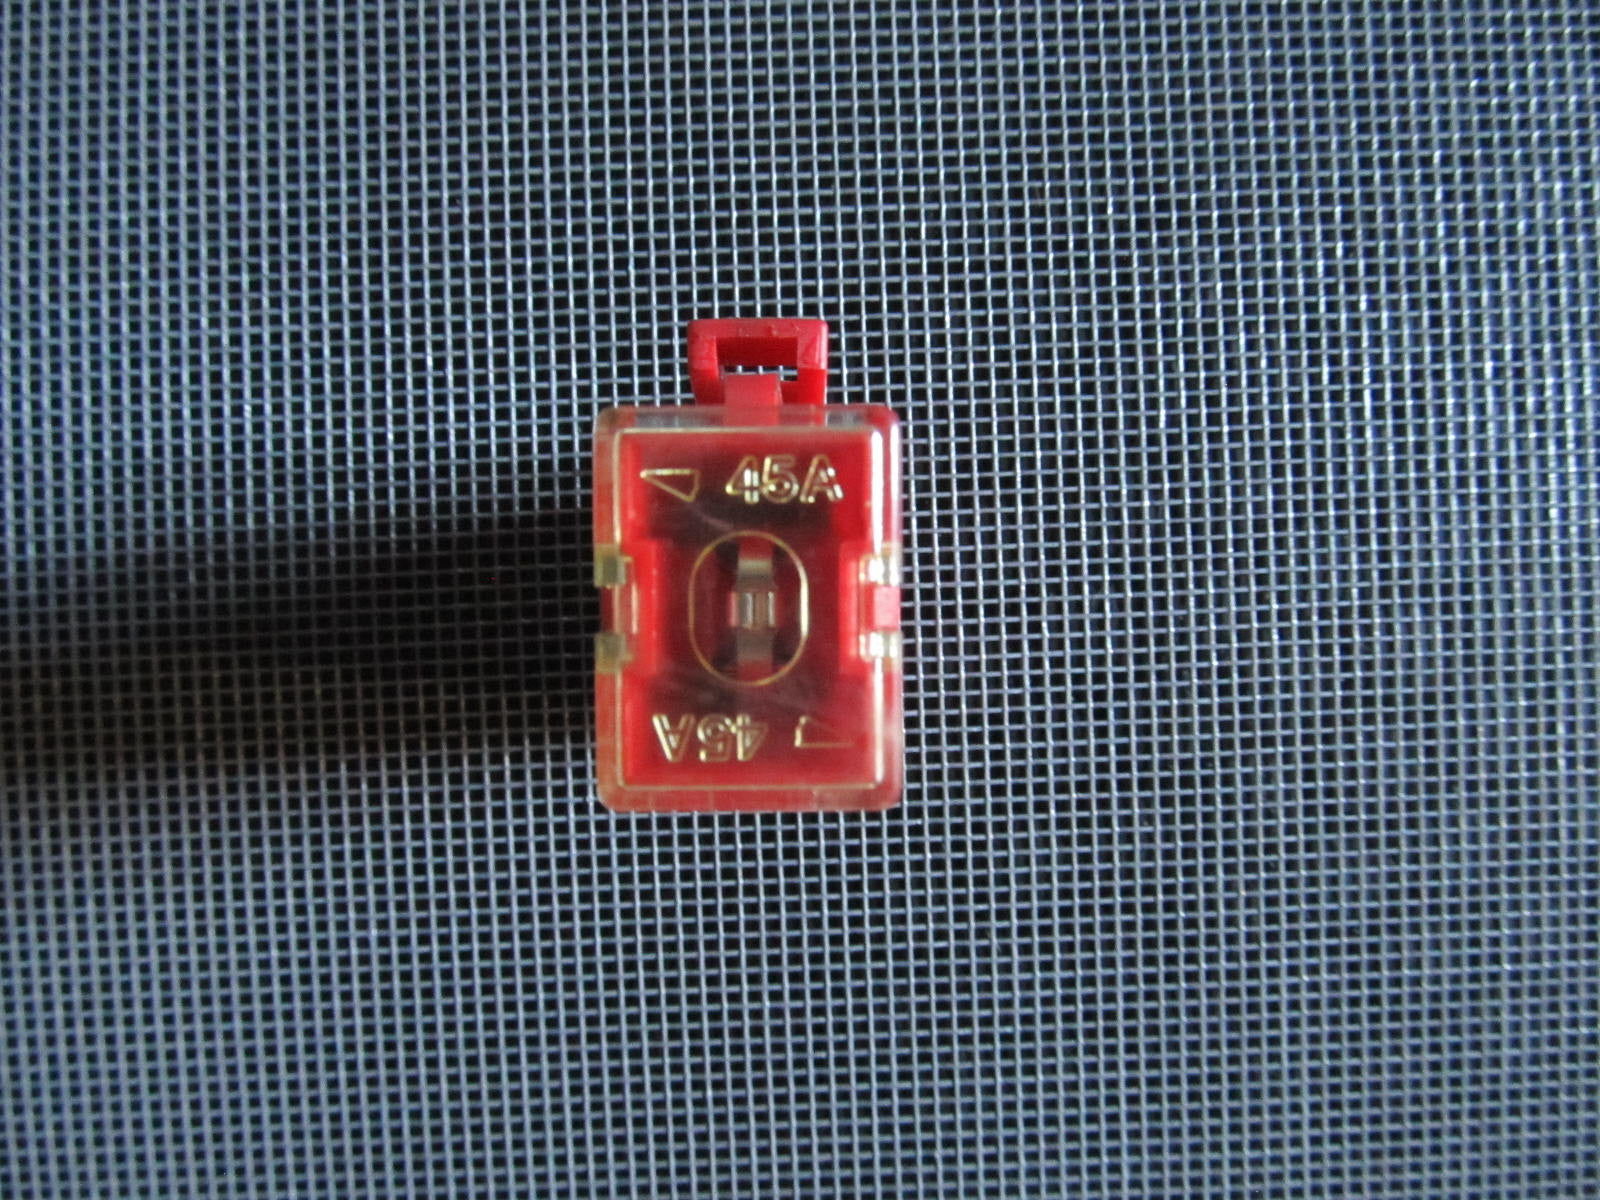 Universal 45A Pal Fuse - Red